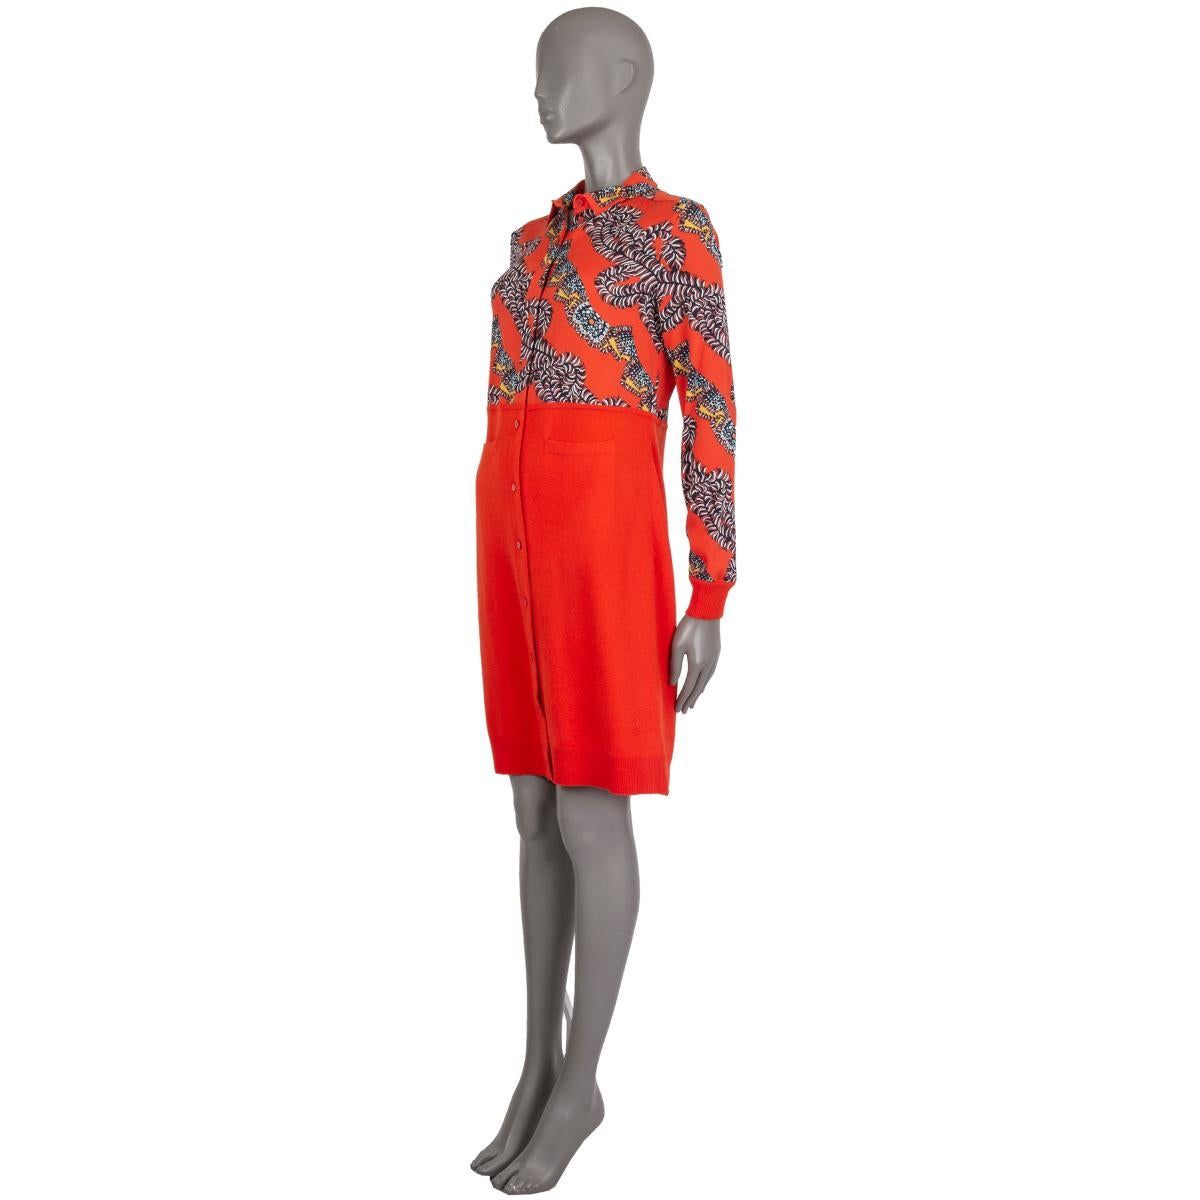 Hermes long-sleeve shirt dress in orange, rapsberry, yellow, baby blue, navy and white silk (98%) and elastane (2%) and orange knit wool (80%) and cashmere (20%). With flat collar, ribbed-knit cuffs and hem, and two pockets on the front sides.